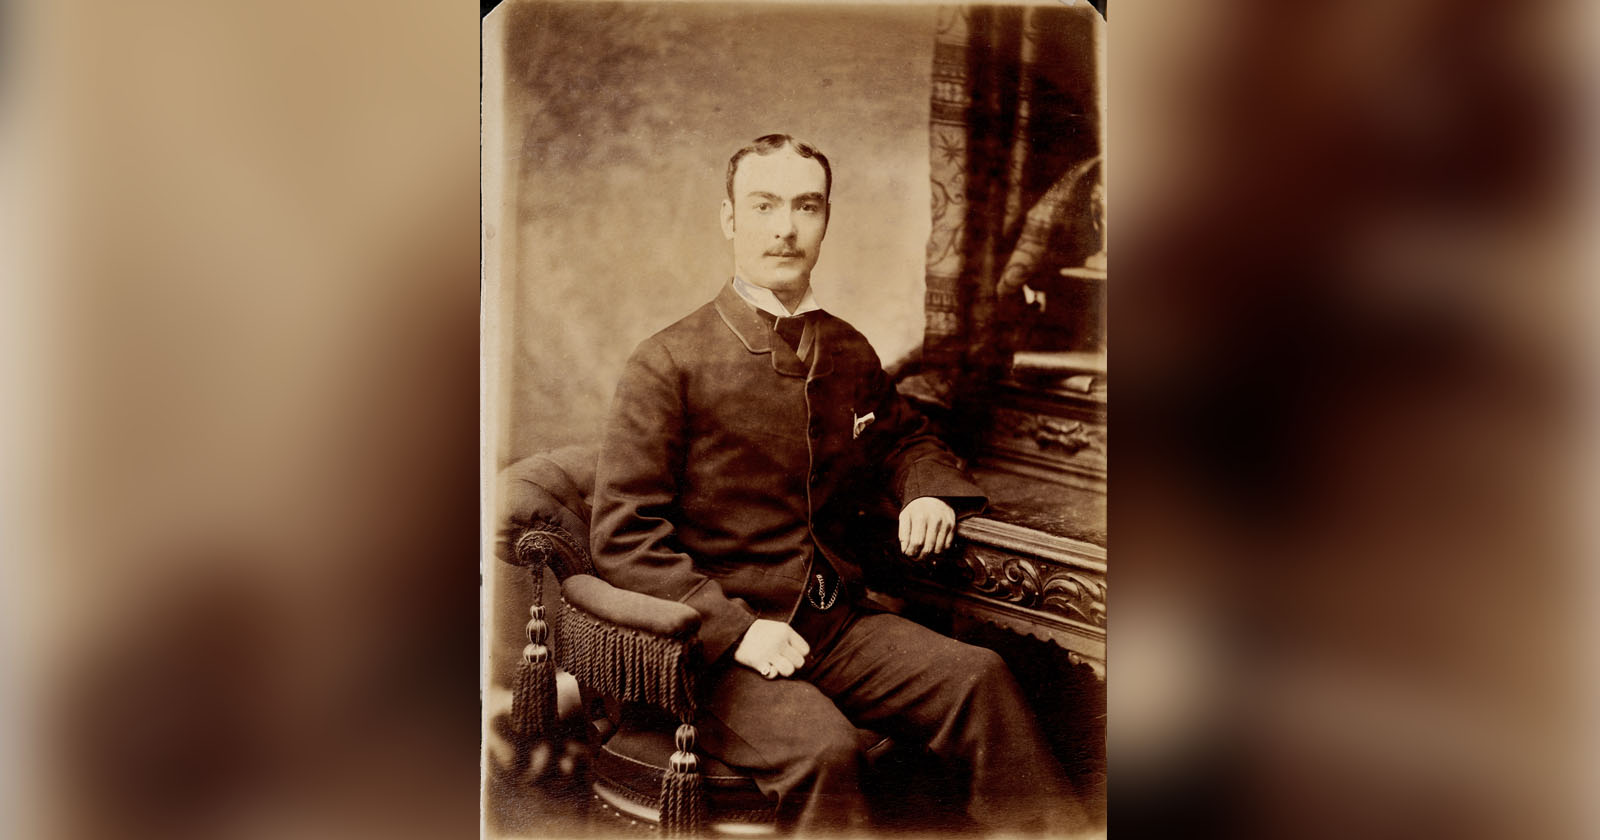 Victorian Photo of Jack the Ripper With Chilling Inscription to be Sold